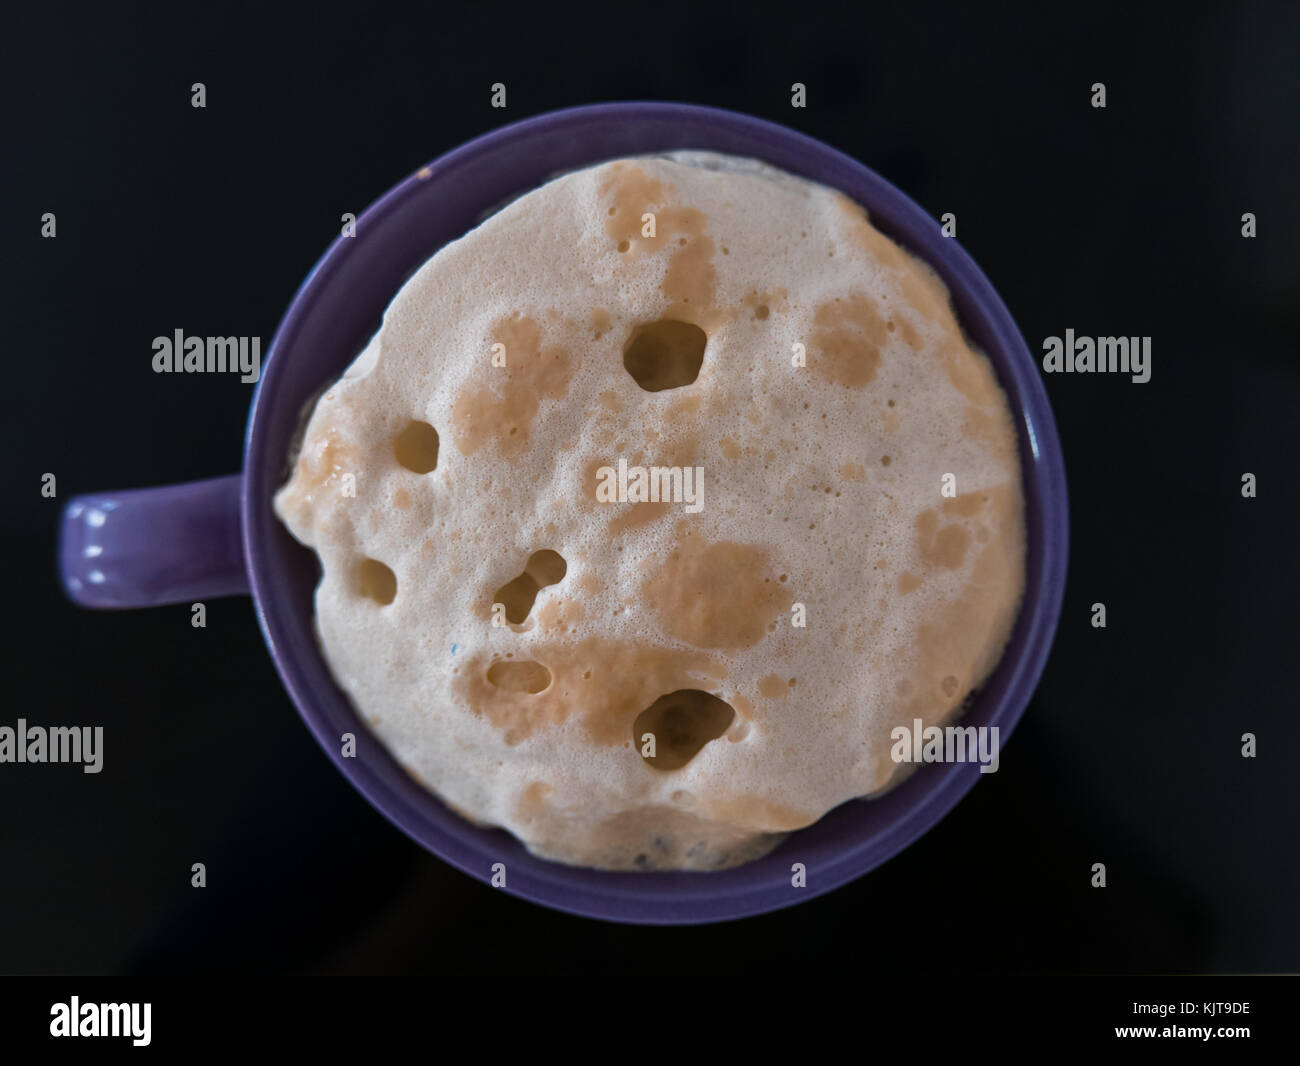 Close up of baker's yeast in a purple cup on black background. Stock Photo